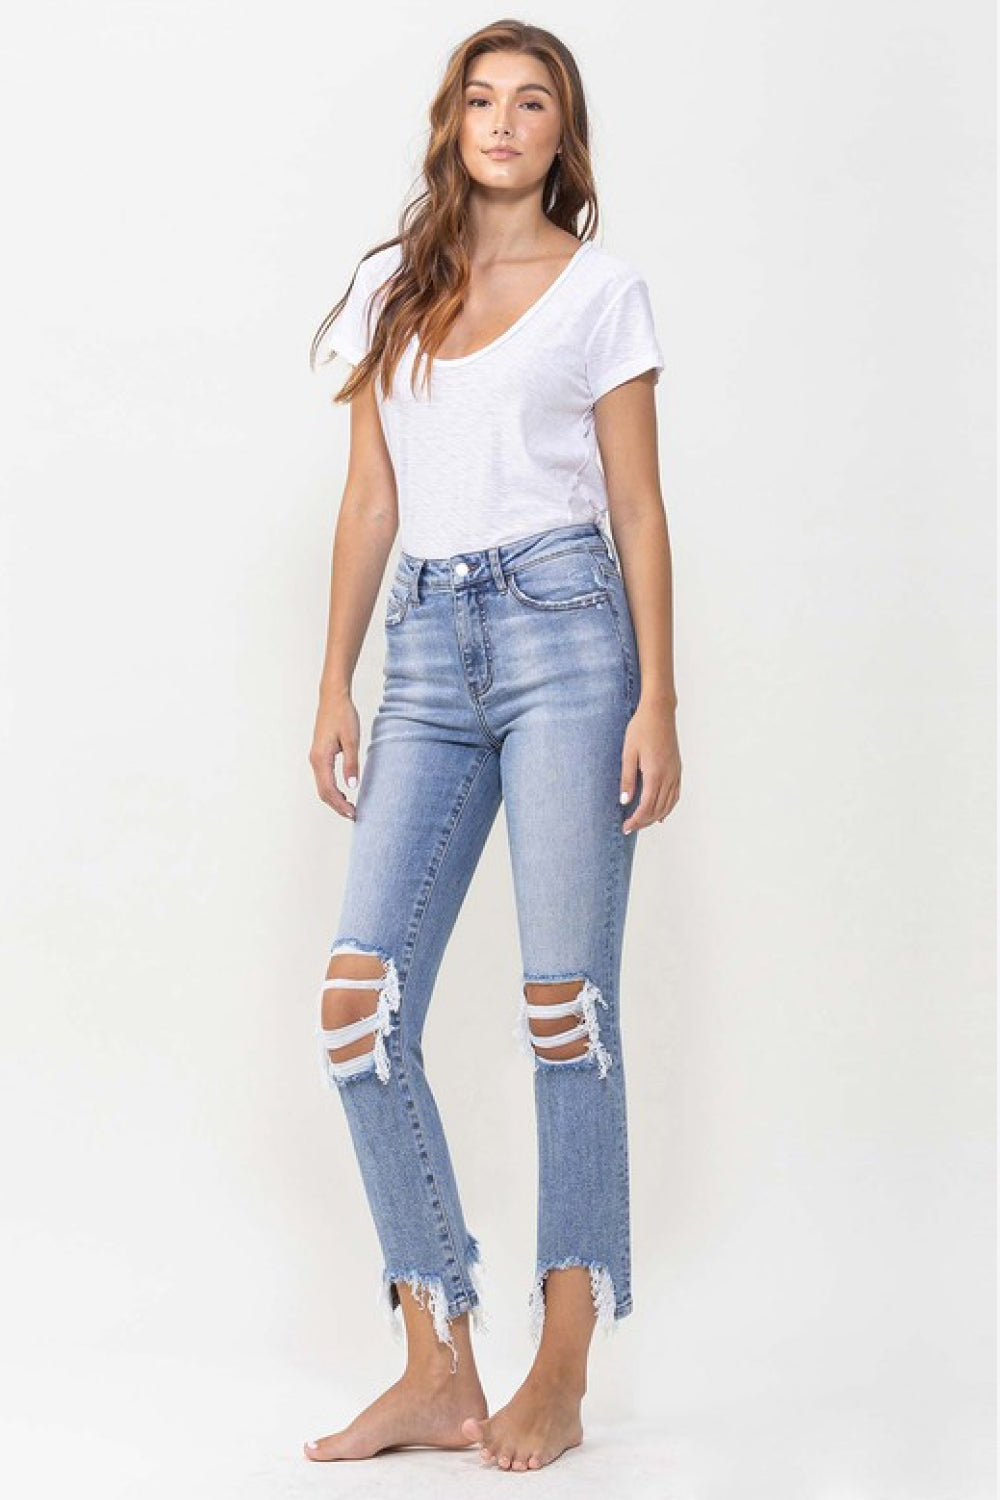 Lovervet Full Size Courtney Super High Rise Kick Flare Jeans - Ships from The US - women's jeans at TFC&H Co.